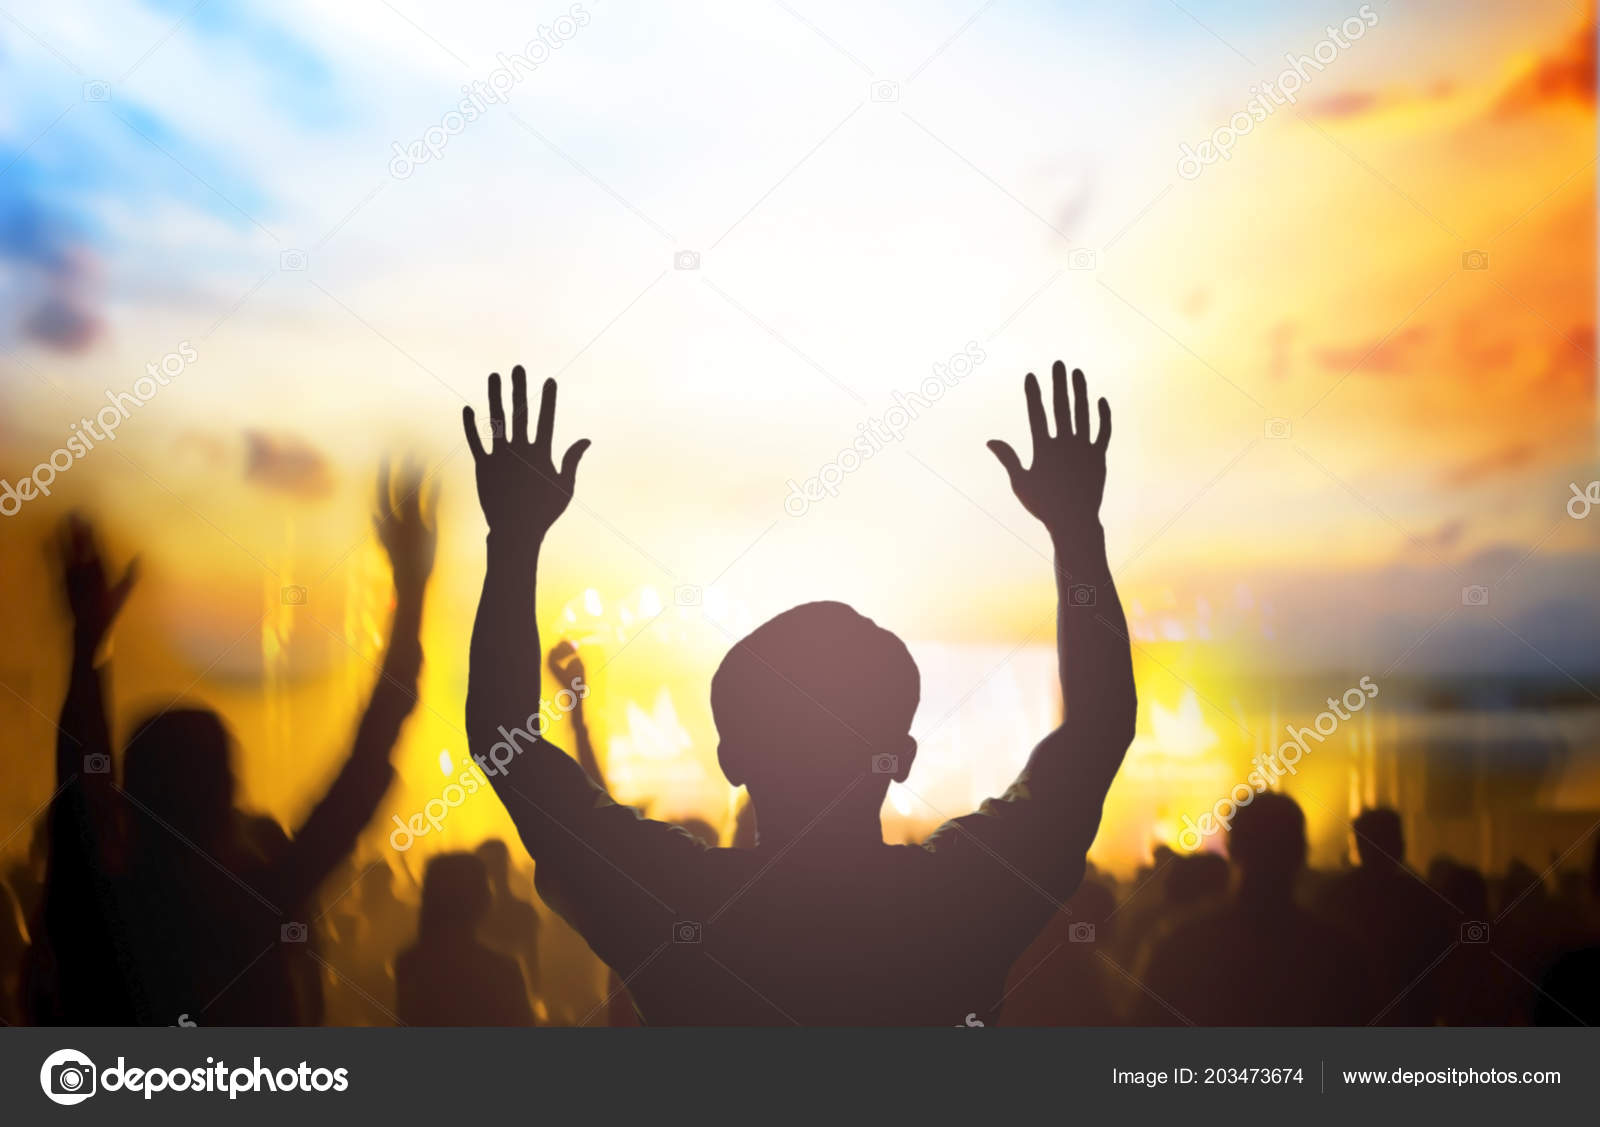 Surrender to god Stock Photos, Royalty Free Surrender to god Images |  Depositphotos